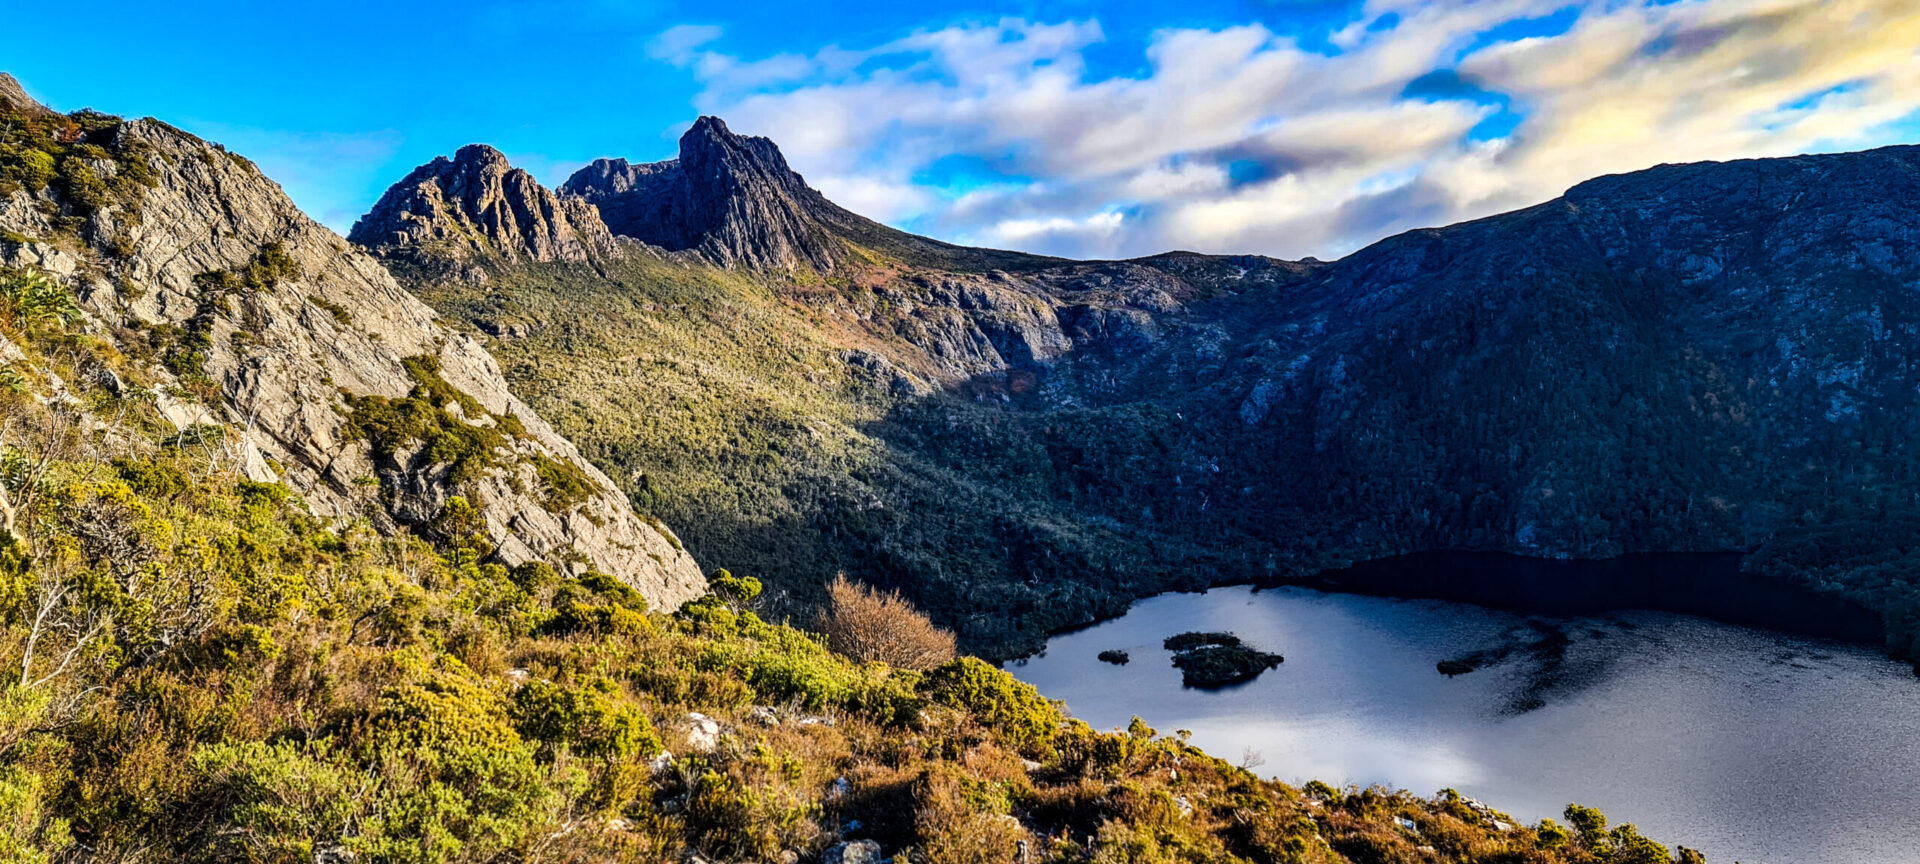 Views out to Cradle Mountain in the distance